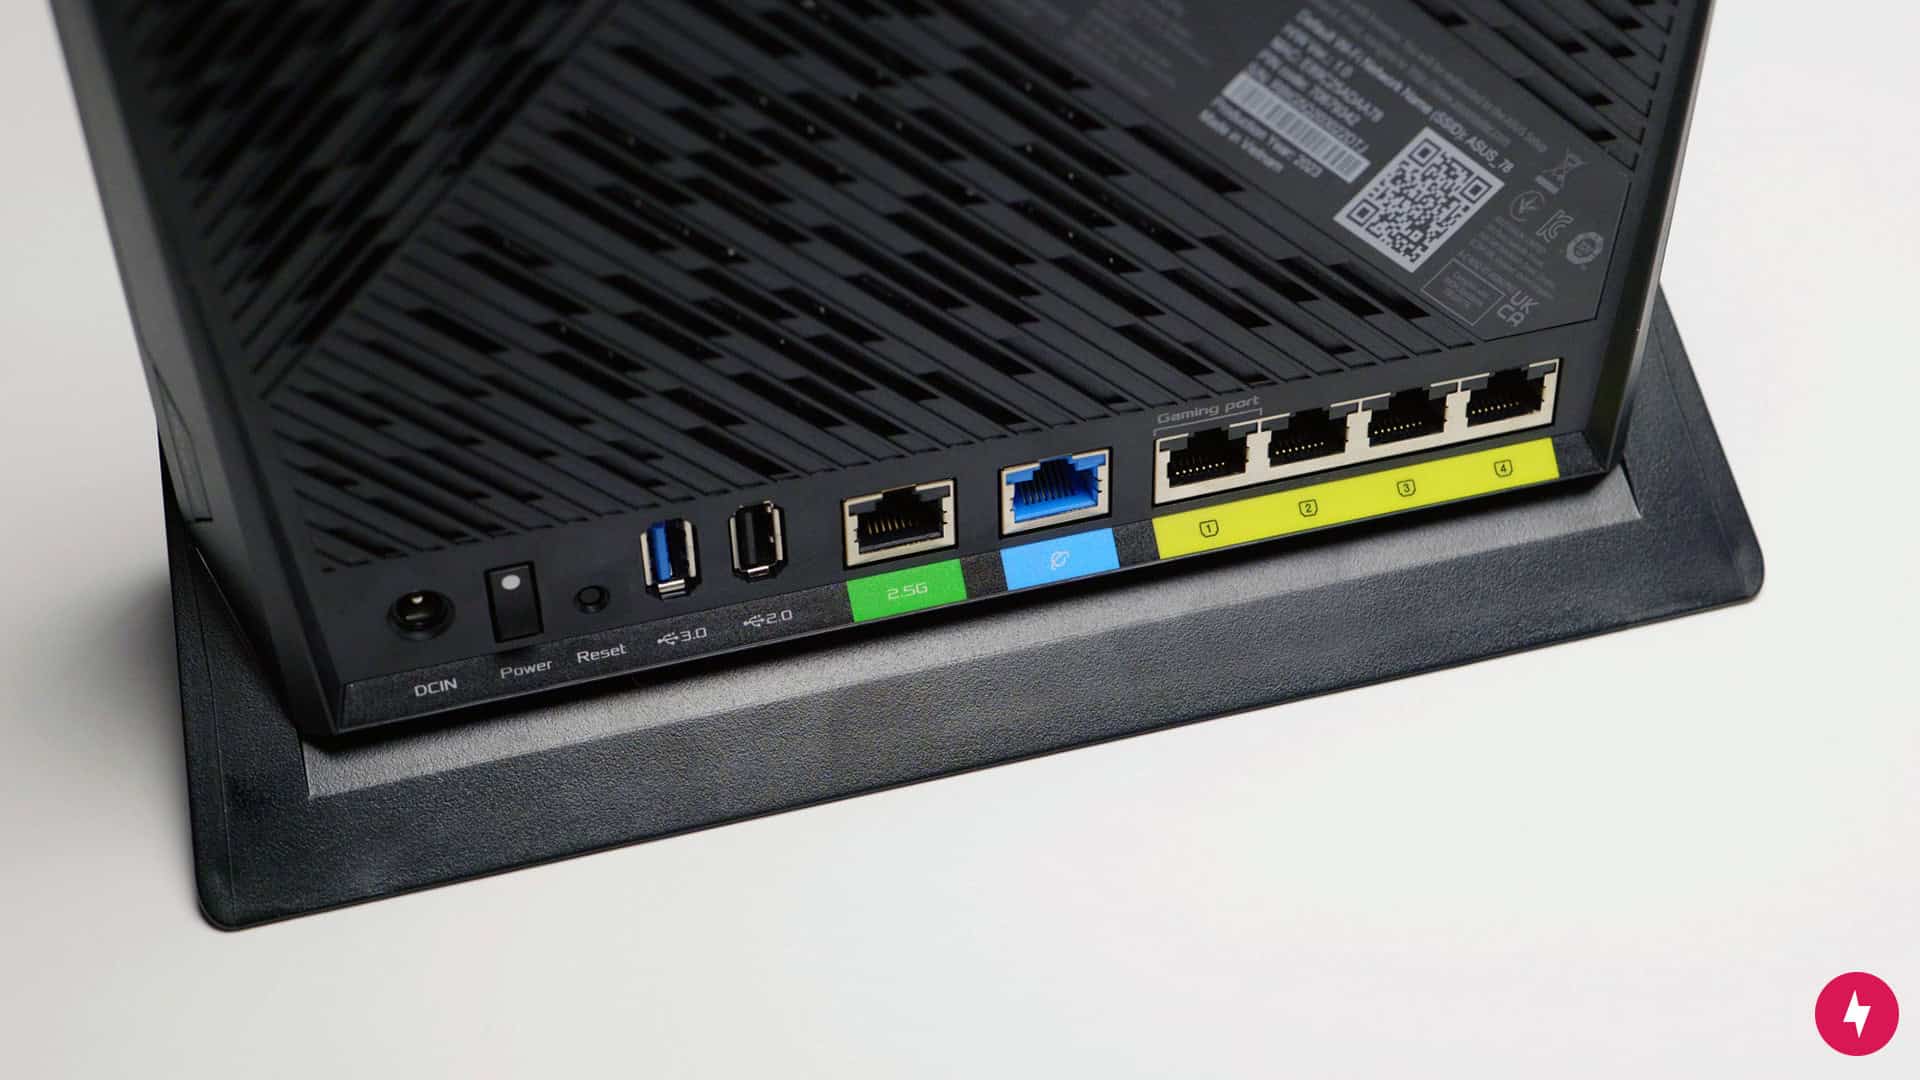 Ports on the back of the Asus RT-AX86U Pro router.